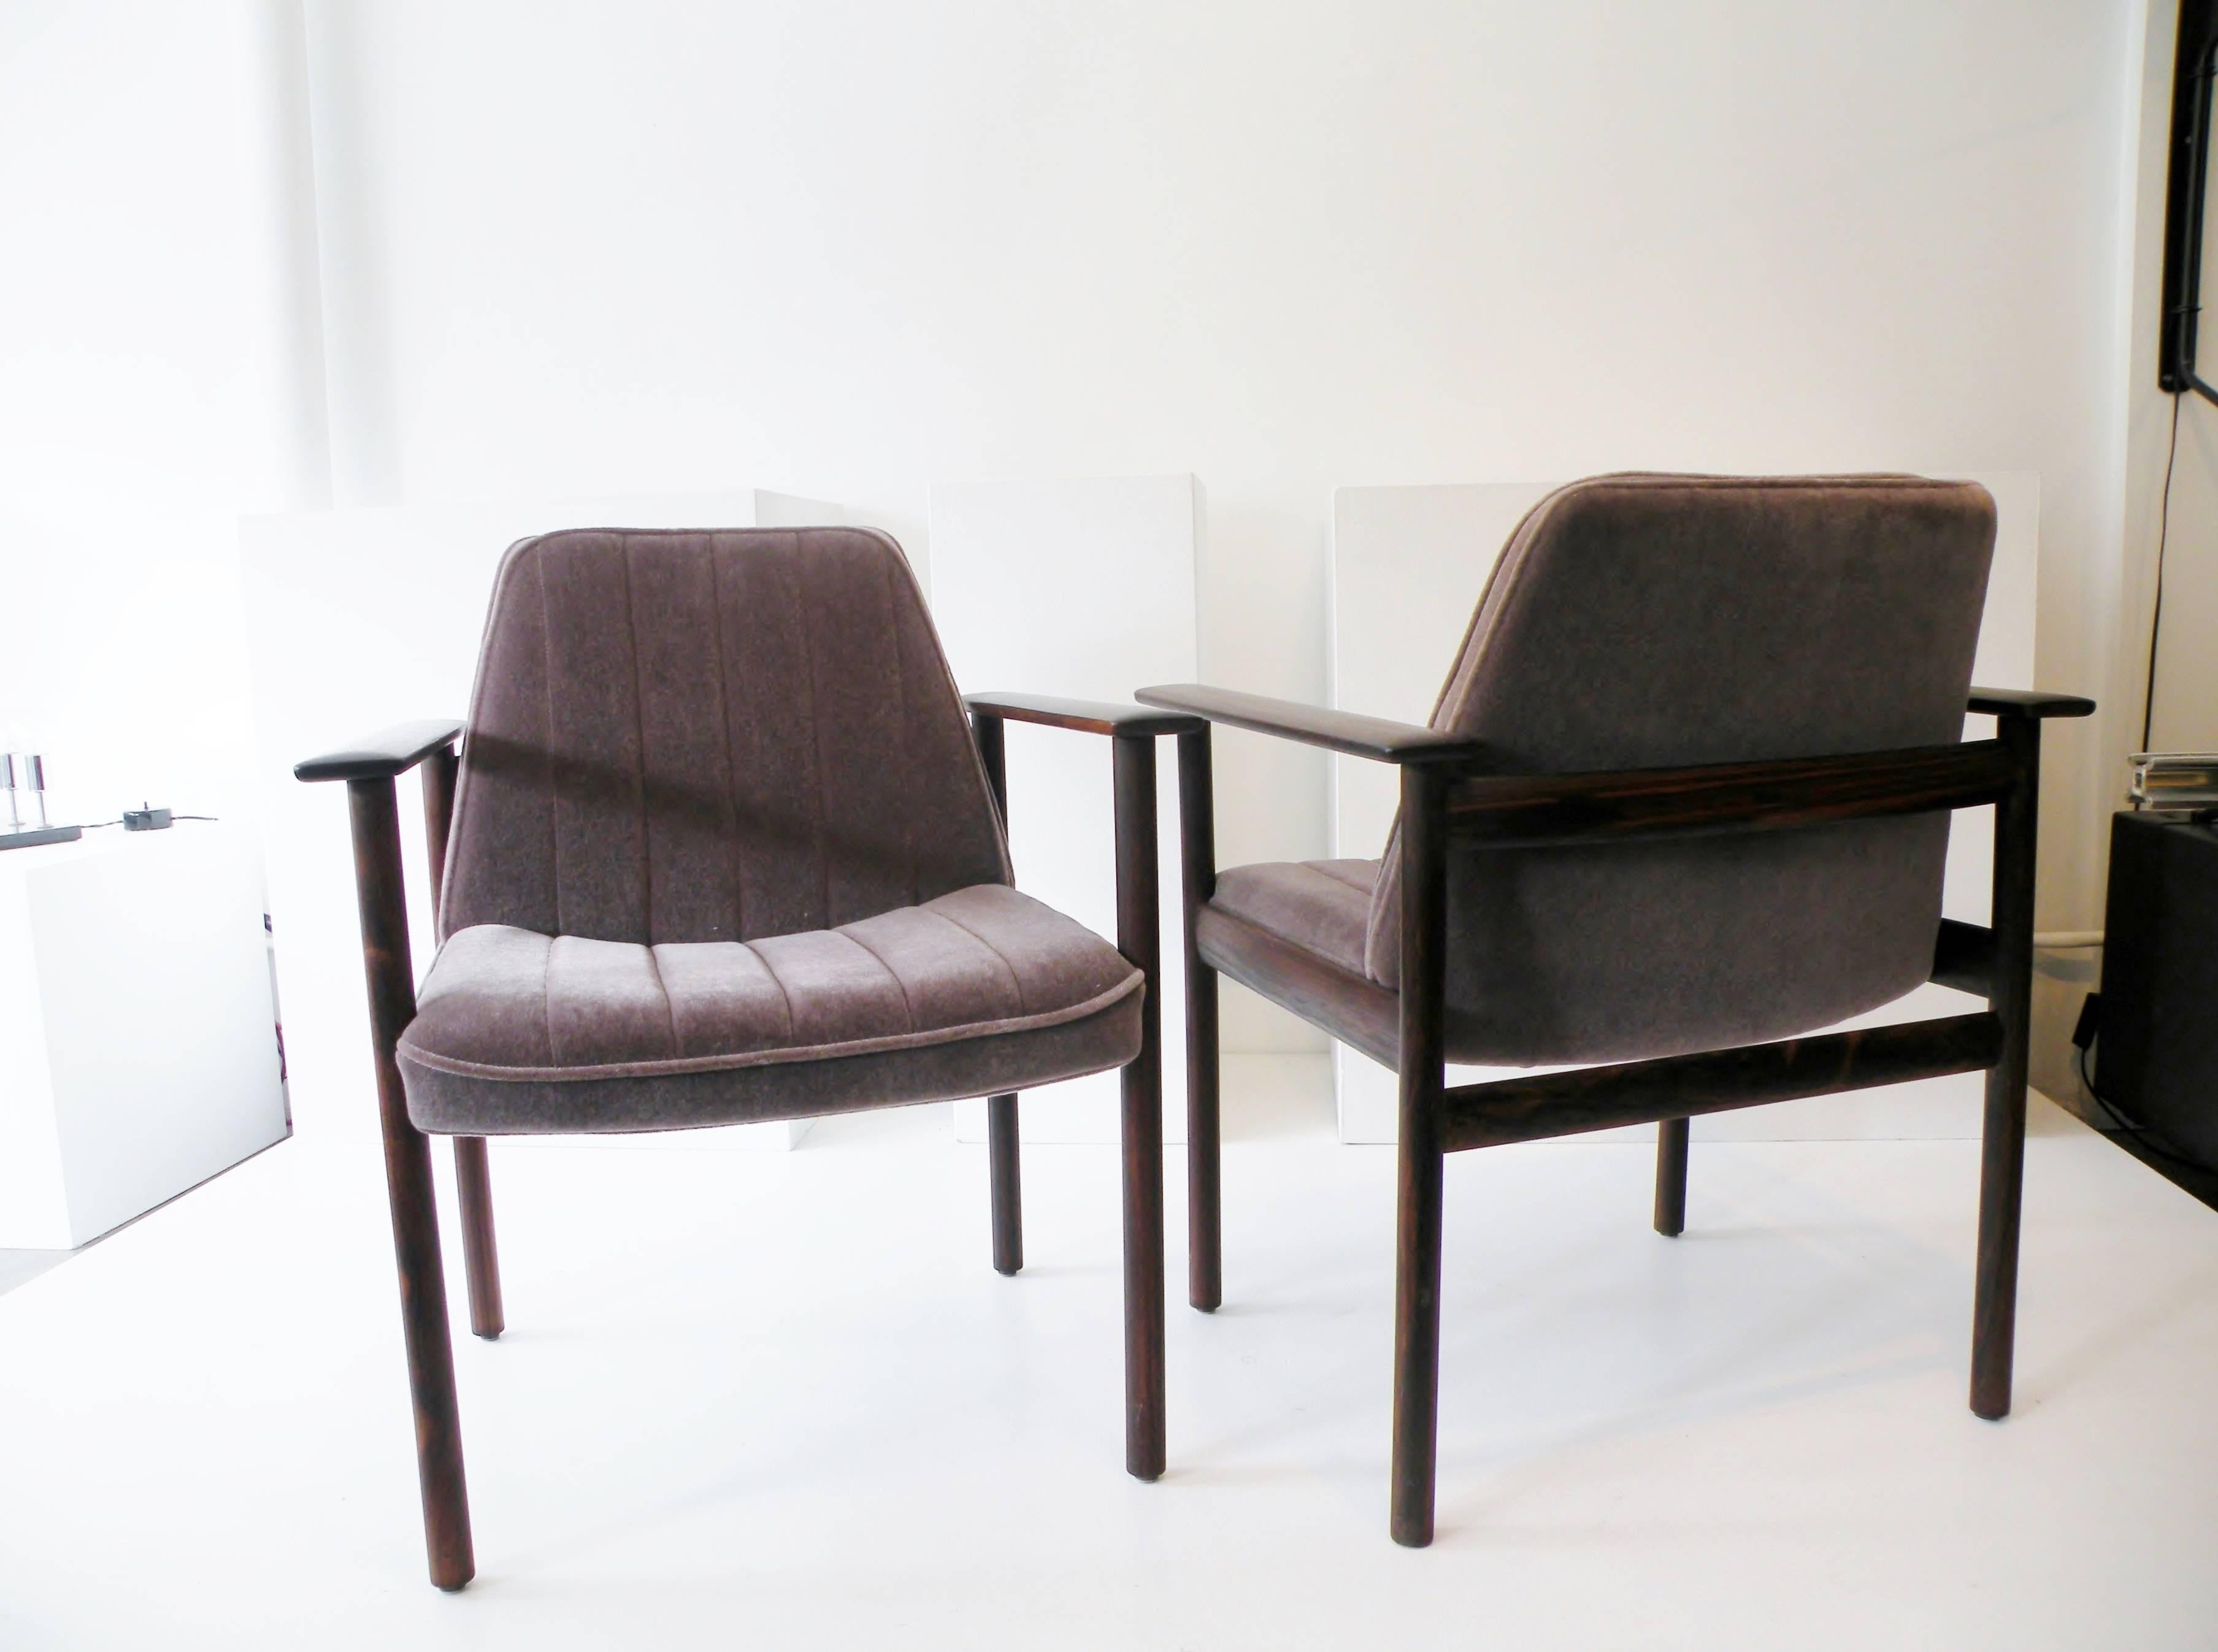 Architectural pair of solid rosewood executive lounge chairs. Made in Norway with design attributed to Frederik Kayser. Fine construction details with sculptural forms and floating backrest and visible mortise and tenon joinery, reupholstered in